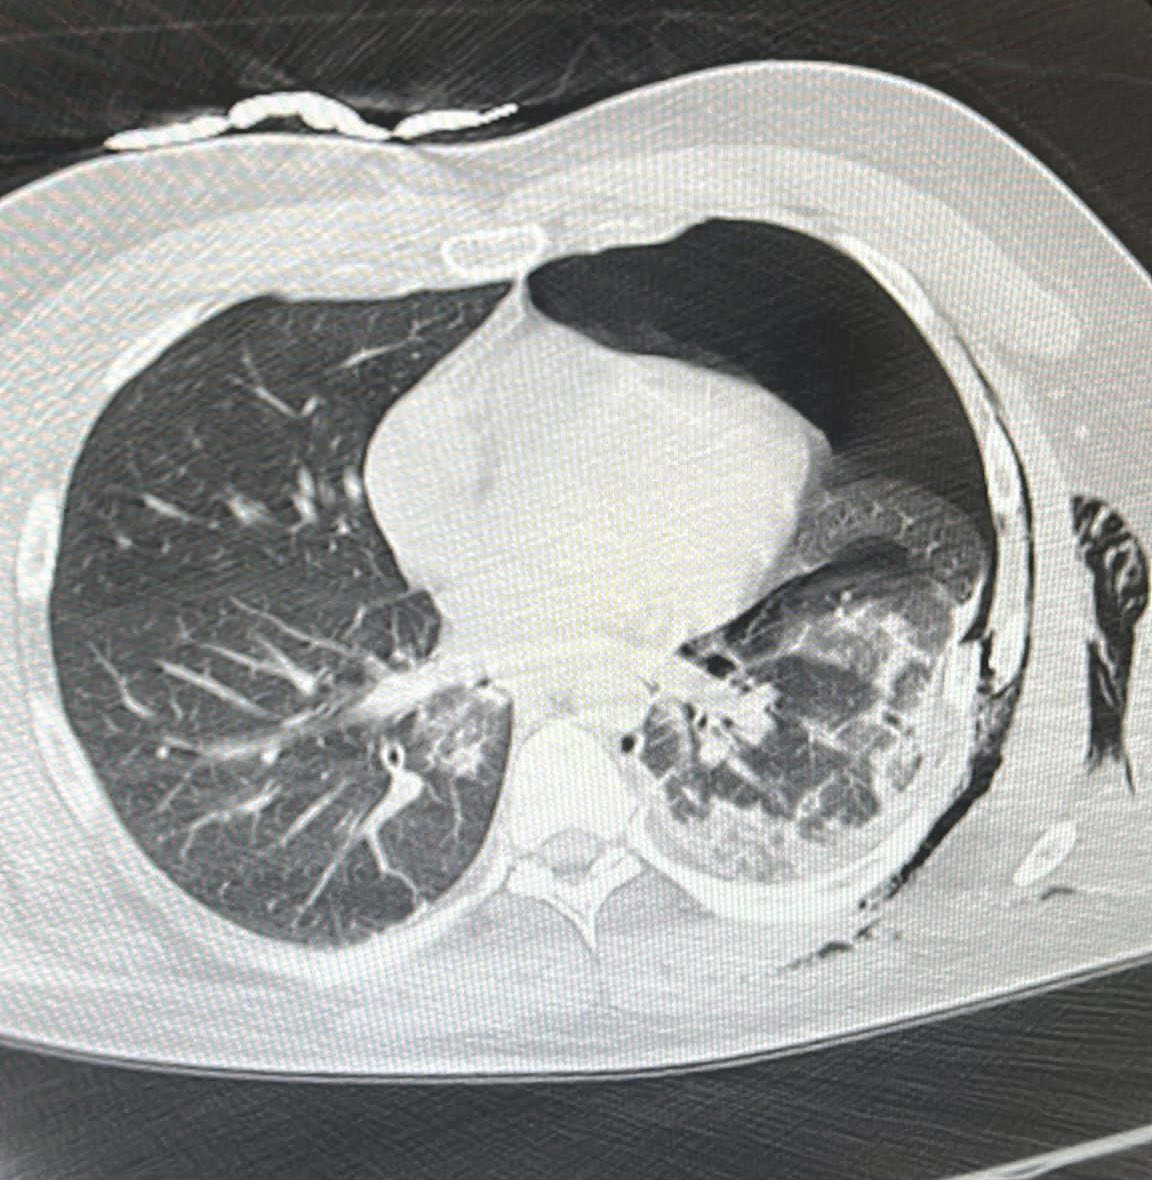 Conservative management of traumatic pneumothorax. Challenging dogma. 150 patients randomised to the @CoMiTEDTrial as of Sunday evening! The largest RCT in traumatic pneumothorax ever. With 70% out of hours recruitment the clinical buy in is amazing. Thanks to all teams involved